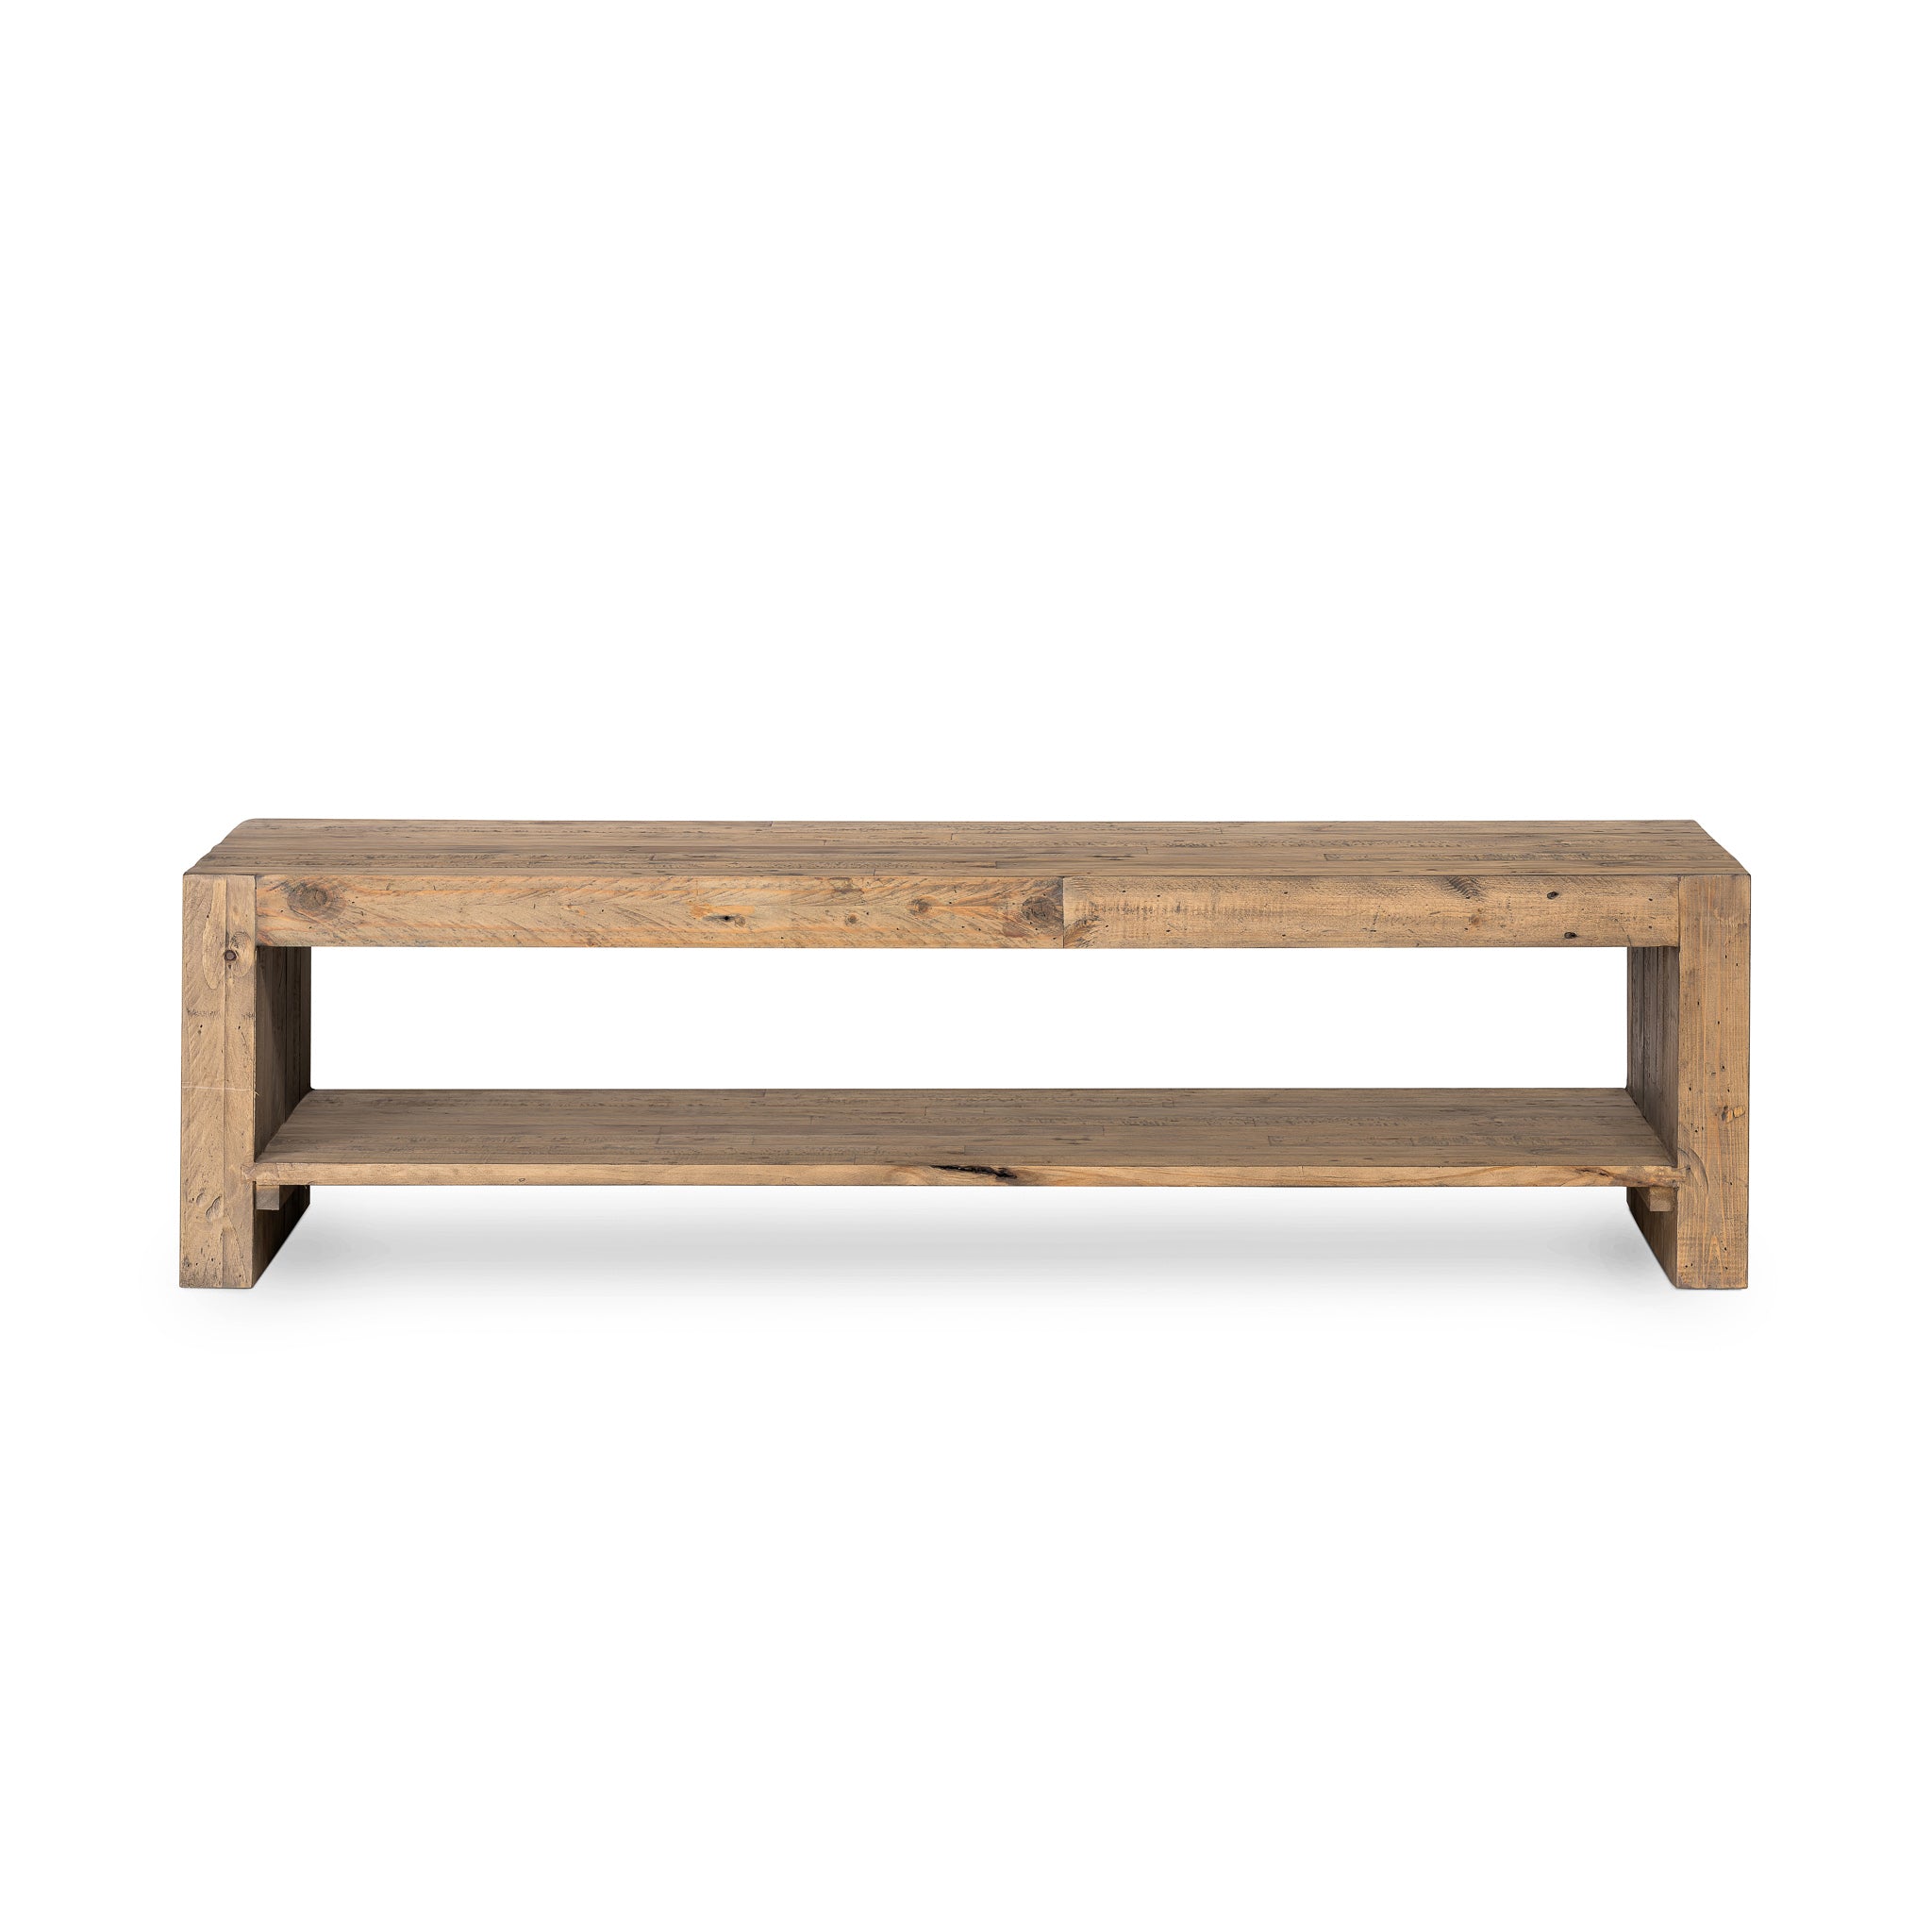 BTEOBFY Natural Wood Edge Contemporary Coffee Cocktail Table, Warm&Air Live Edge Coffee Table,Living Room Coffee Table with Clea